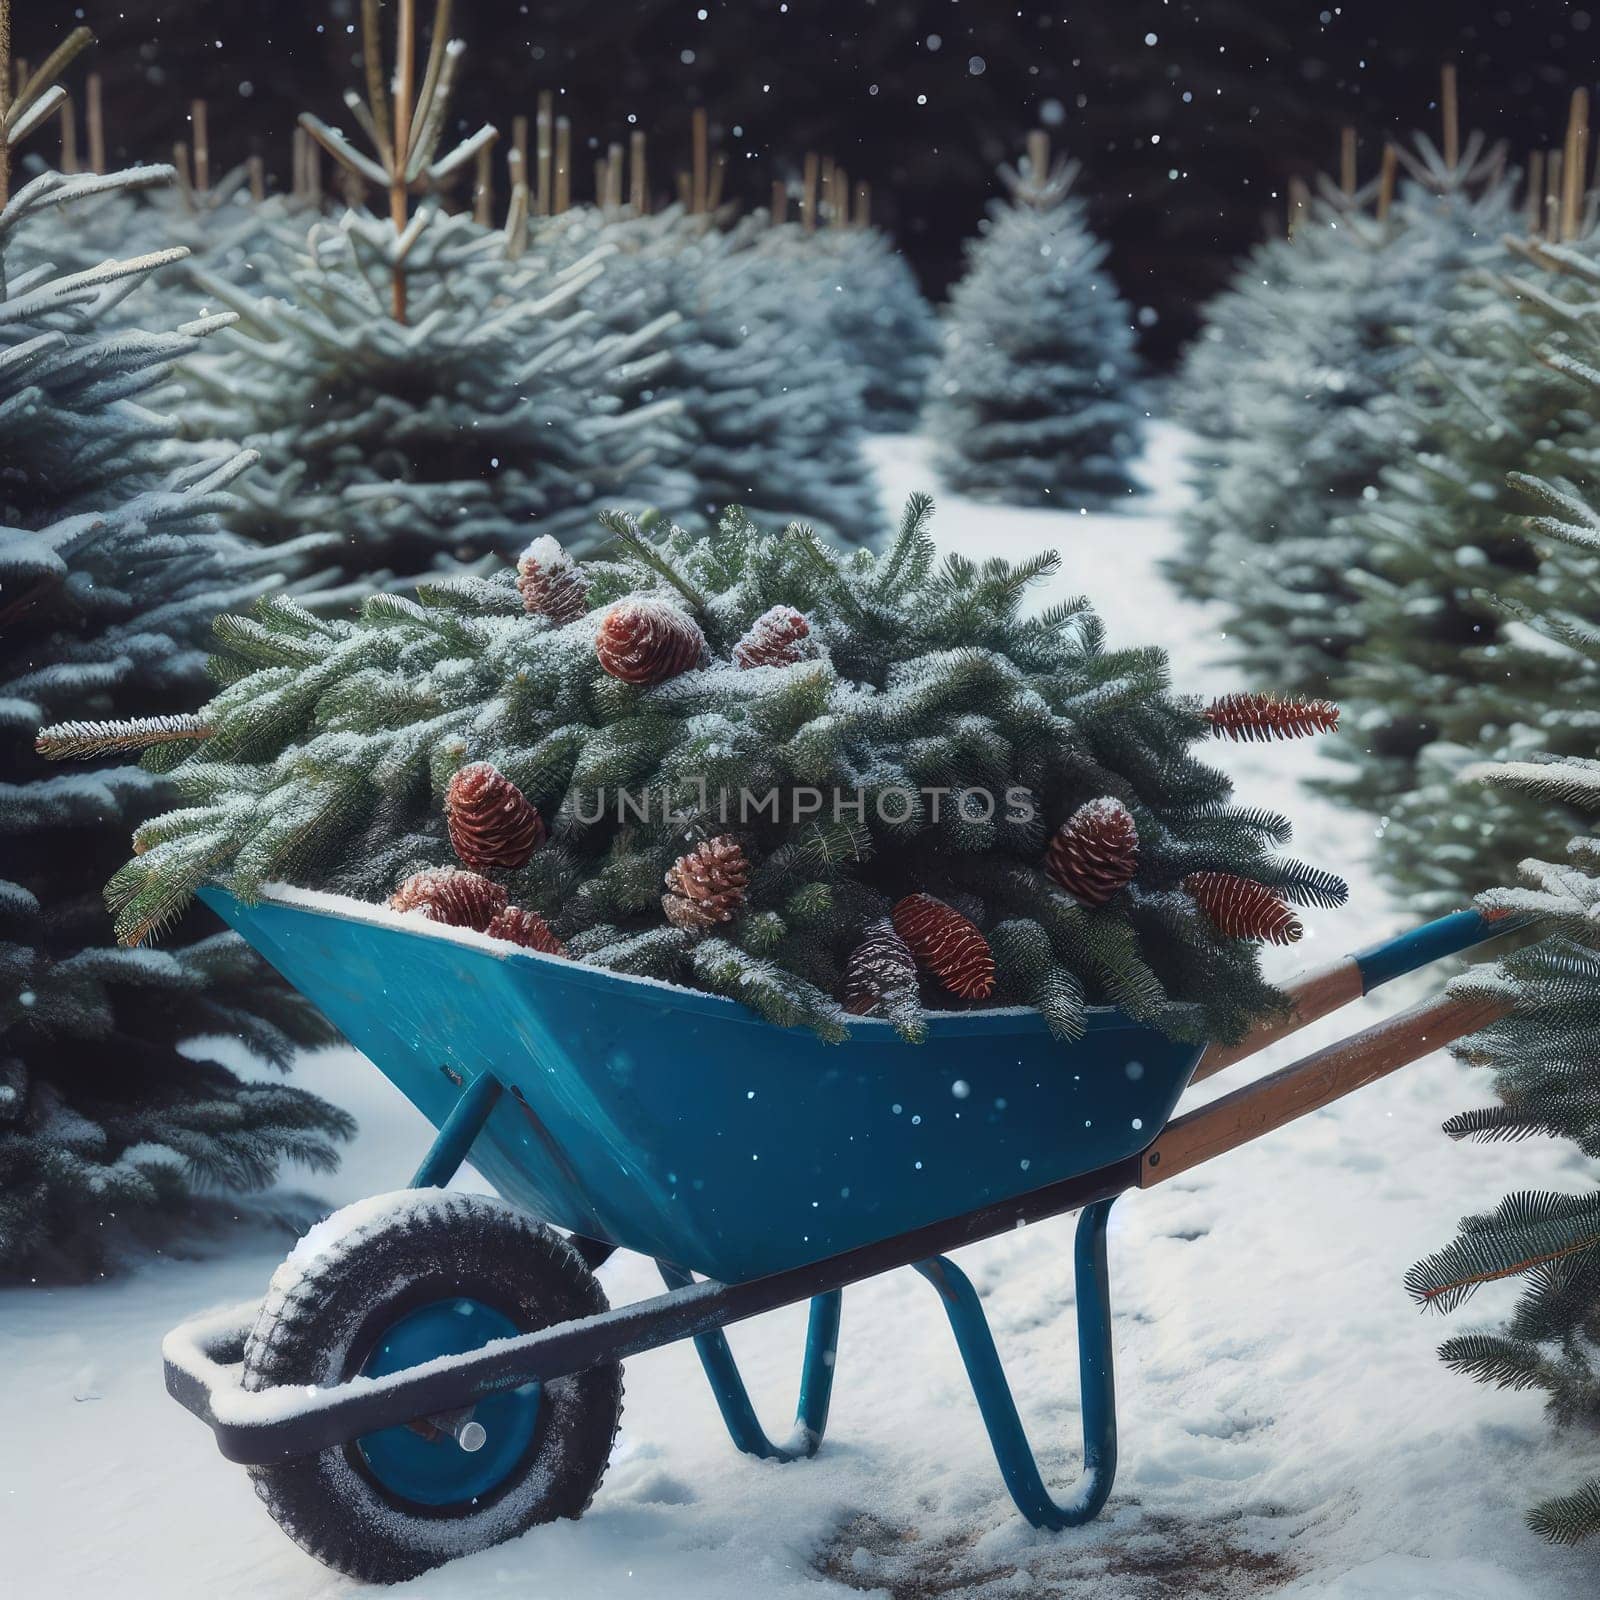 German Tradition: Families Choosing Christmas Trees on a Blue Carriage at Fir Plantation.